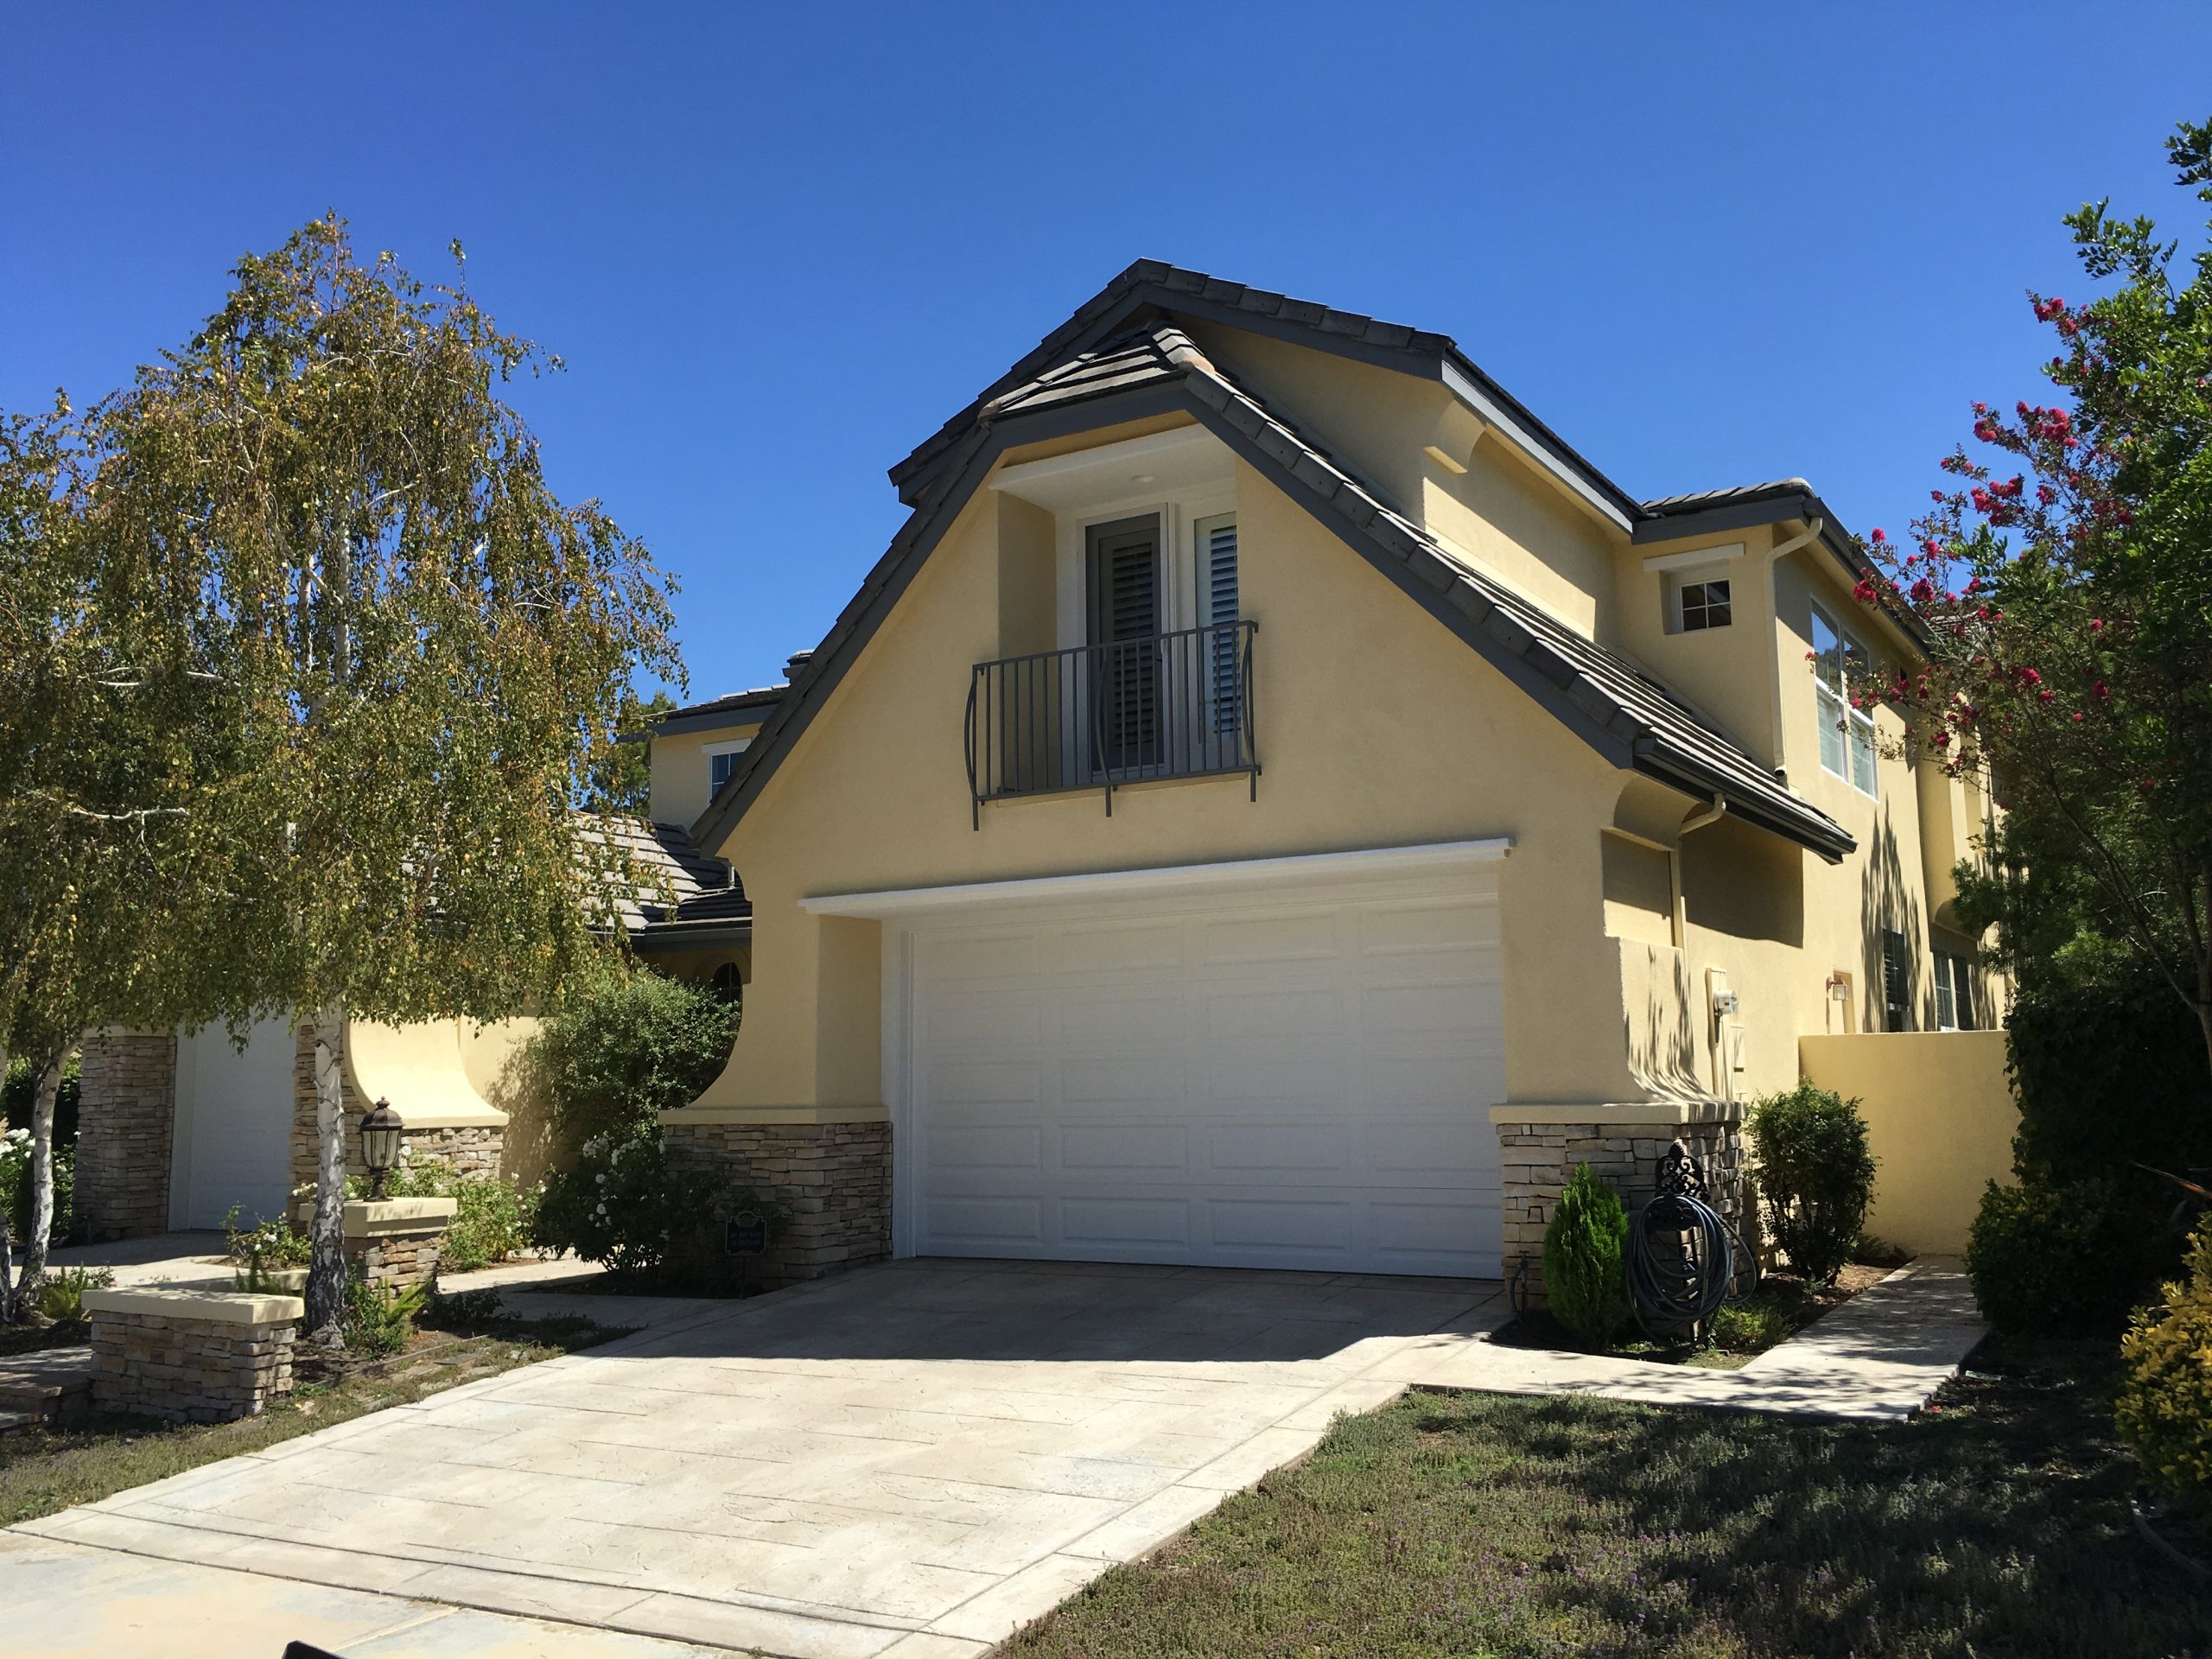 Yellow stucco exterior in thousand oaks